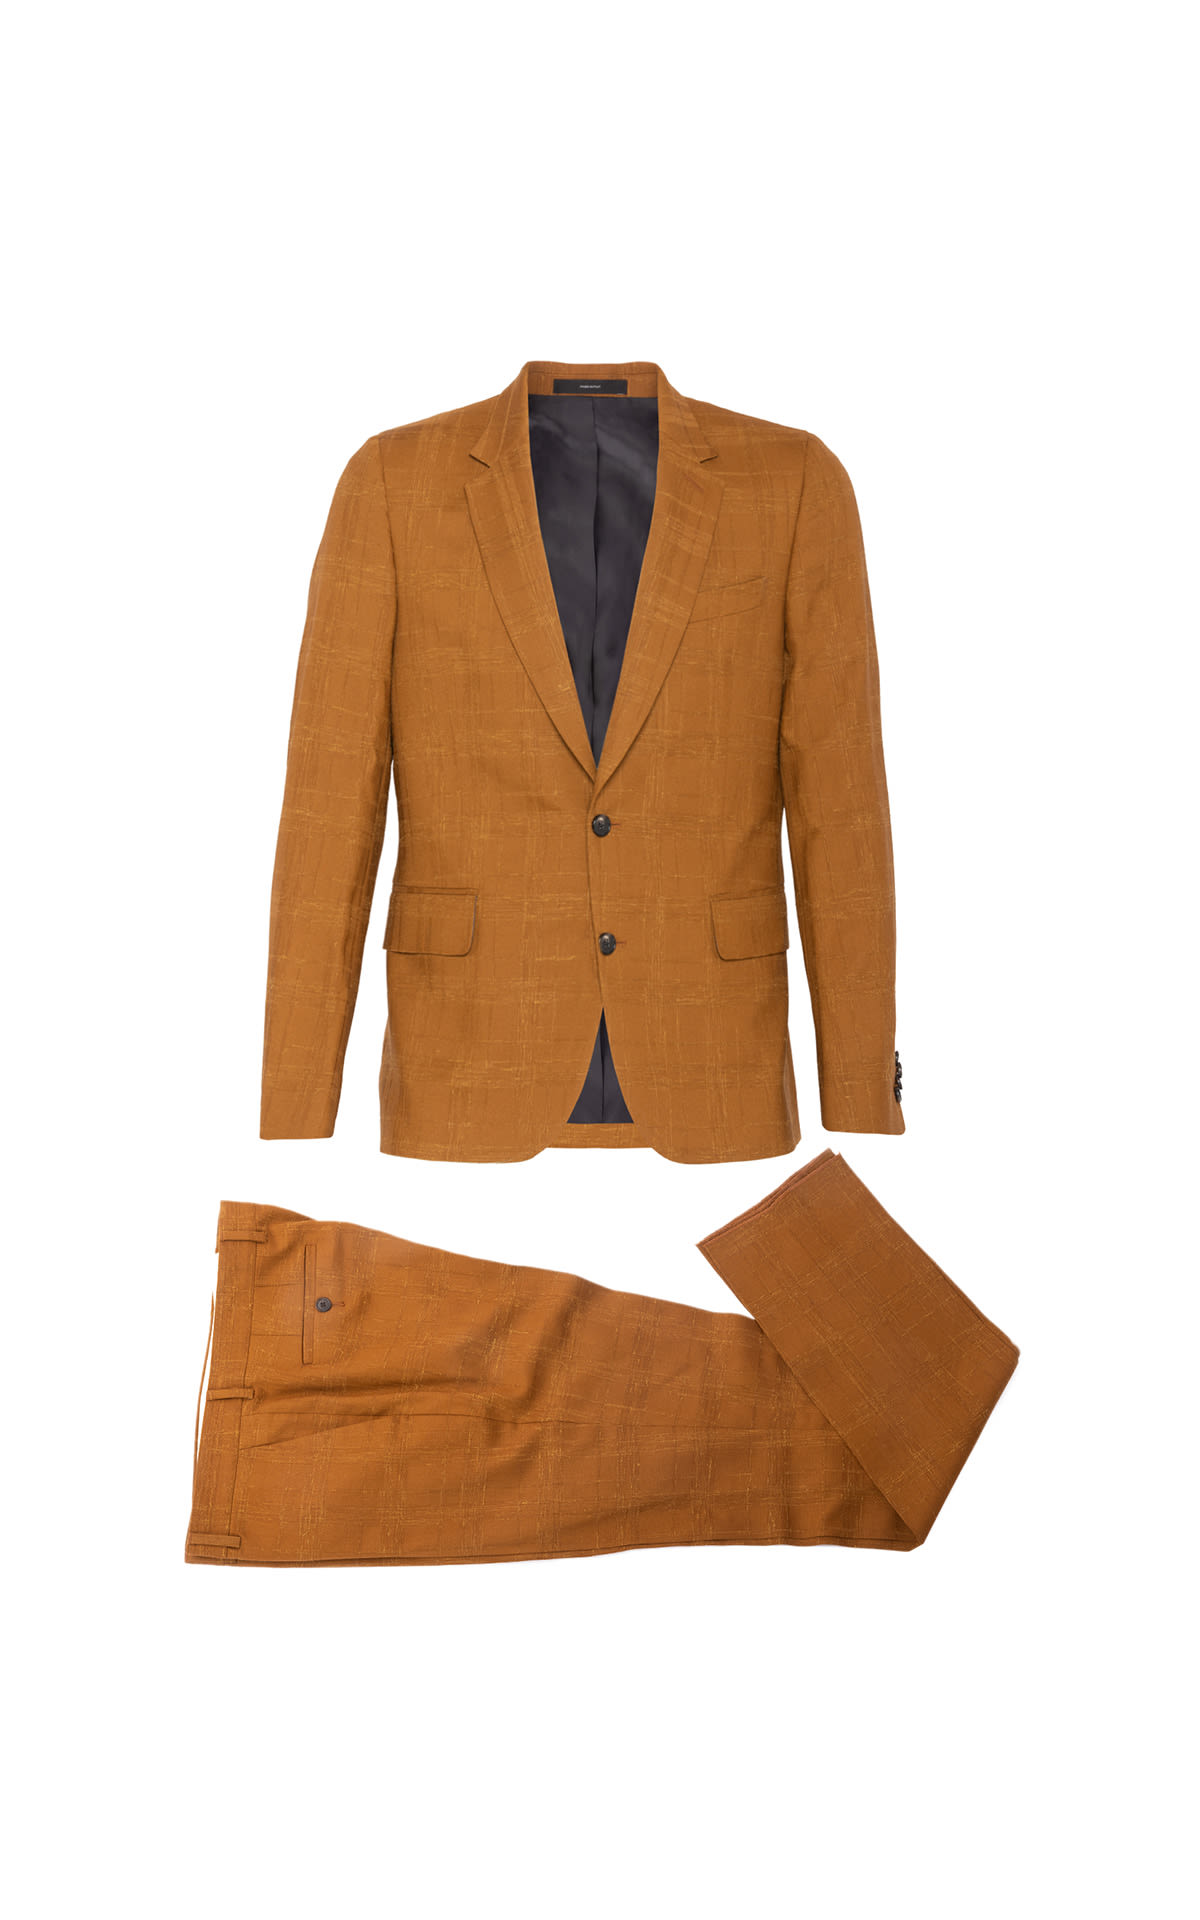 Paul Smith Men's suit: jacket and trousers